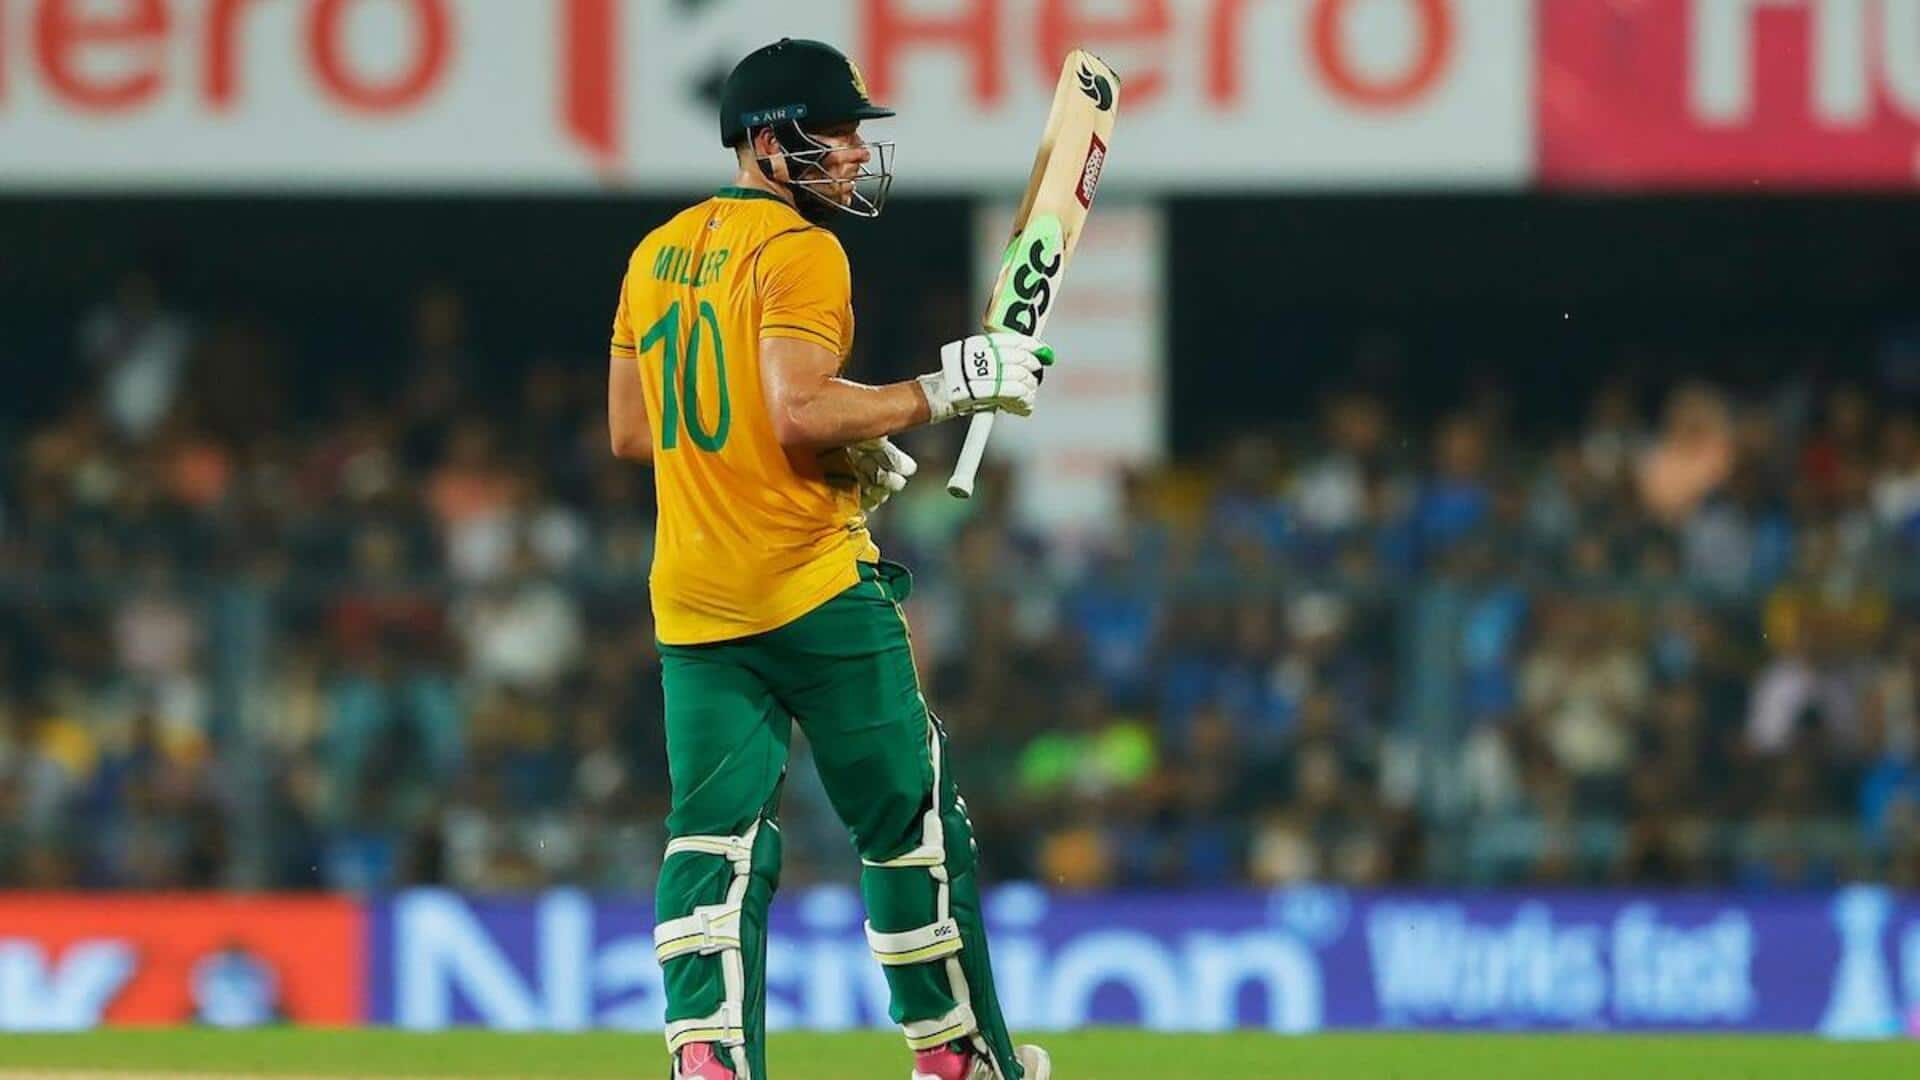 SA vs IND, T20I series: Here are the player battles